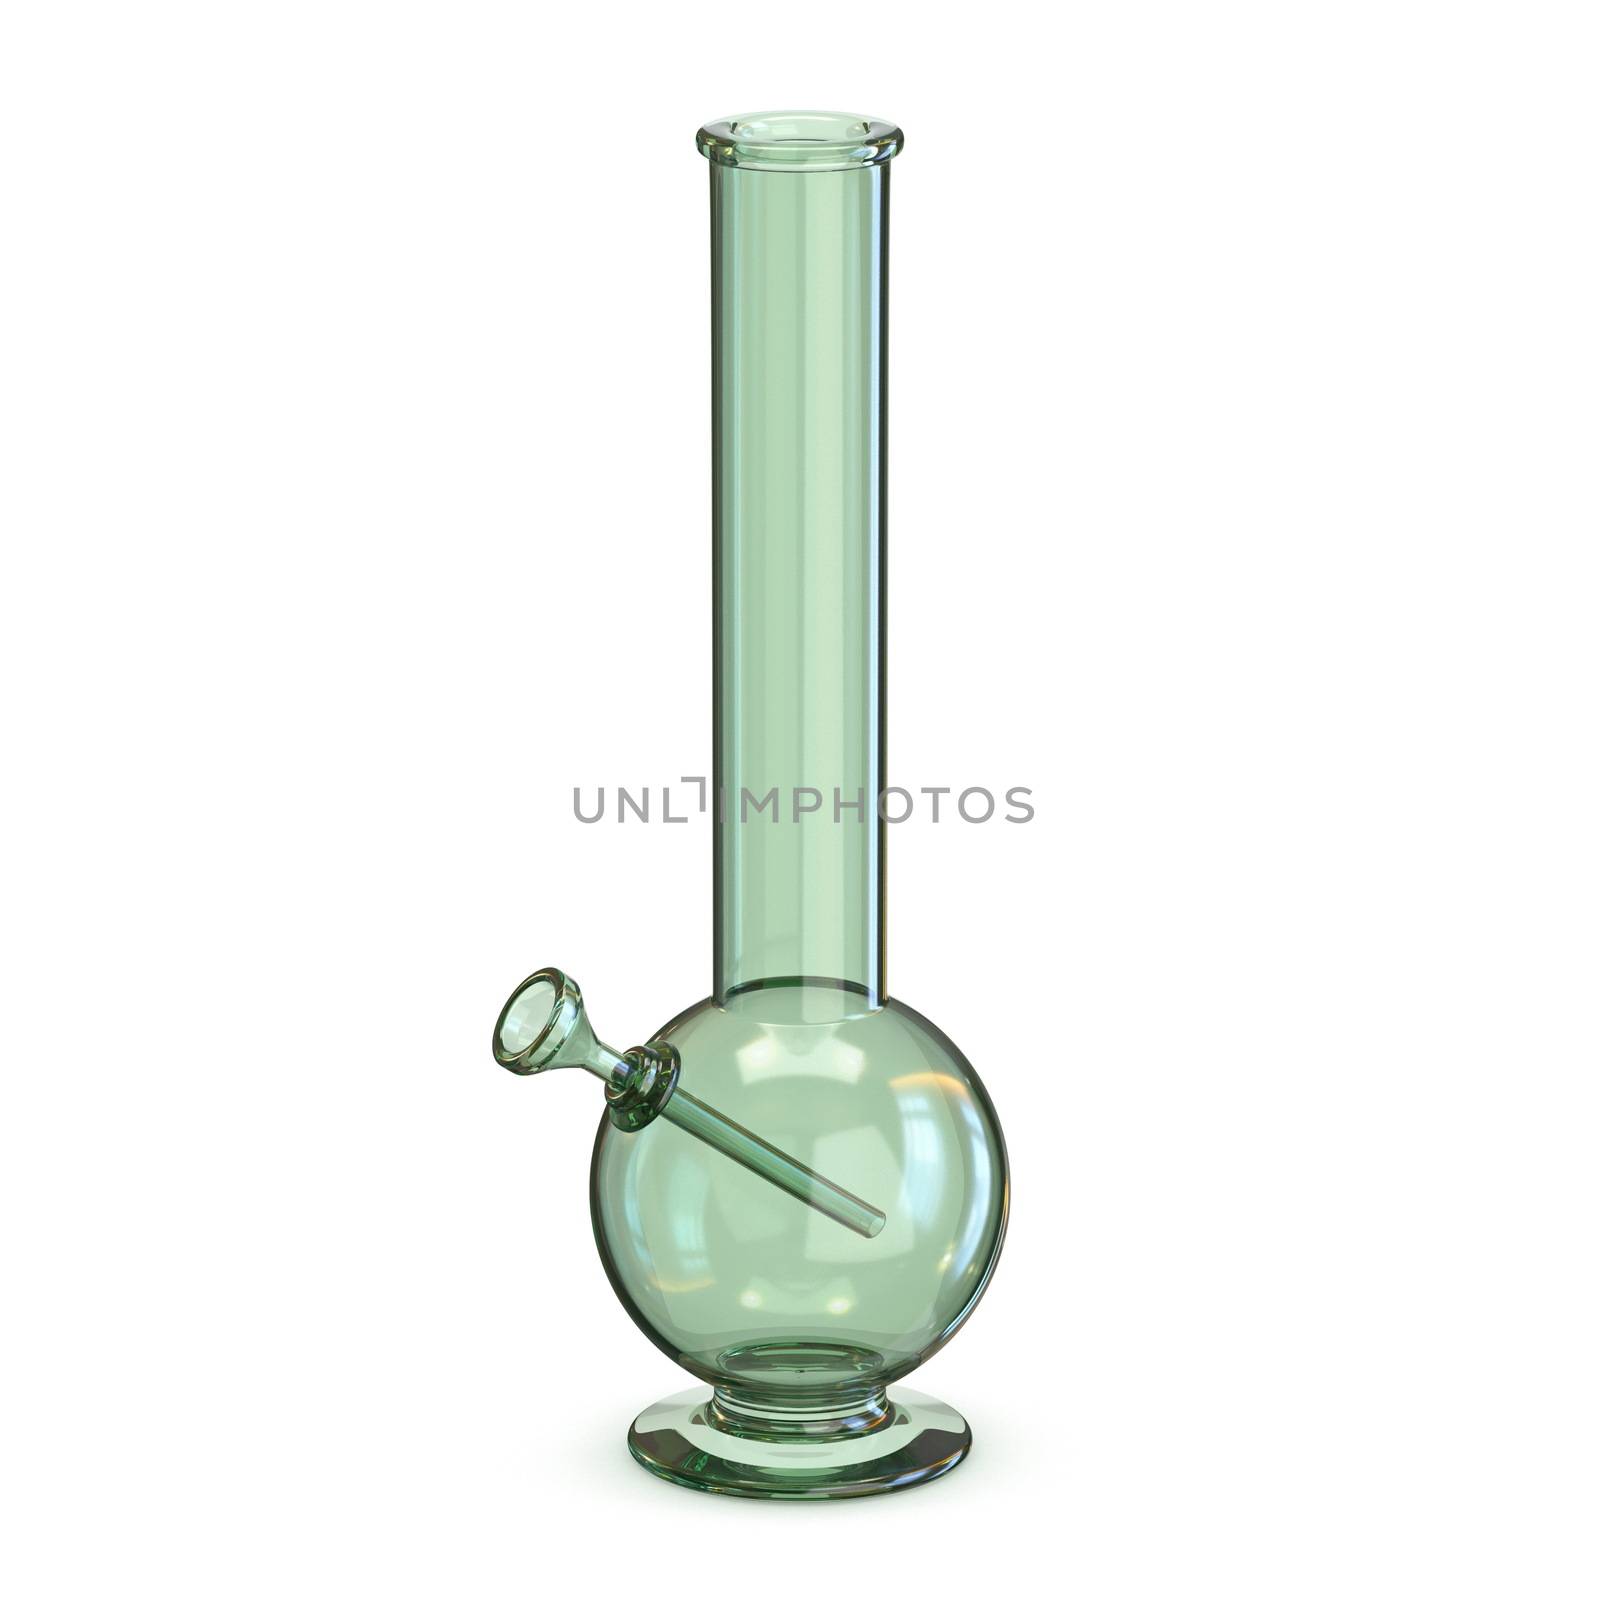 Simple green glass bong 3D render illustration isolated on white background